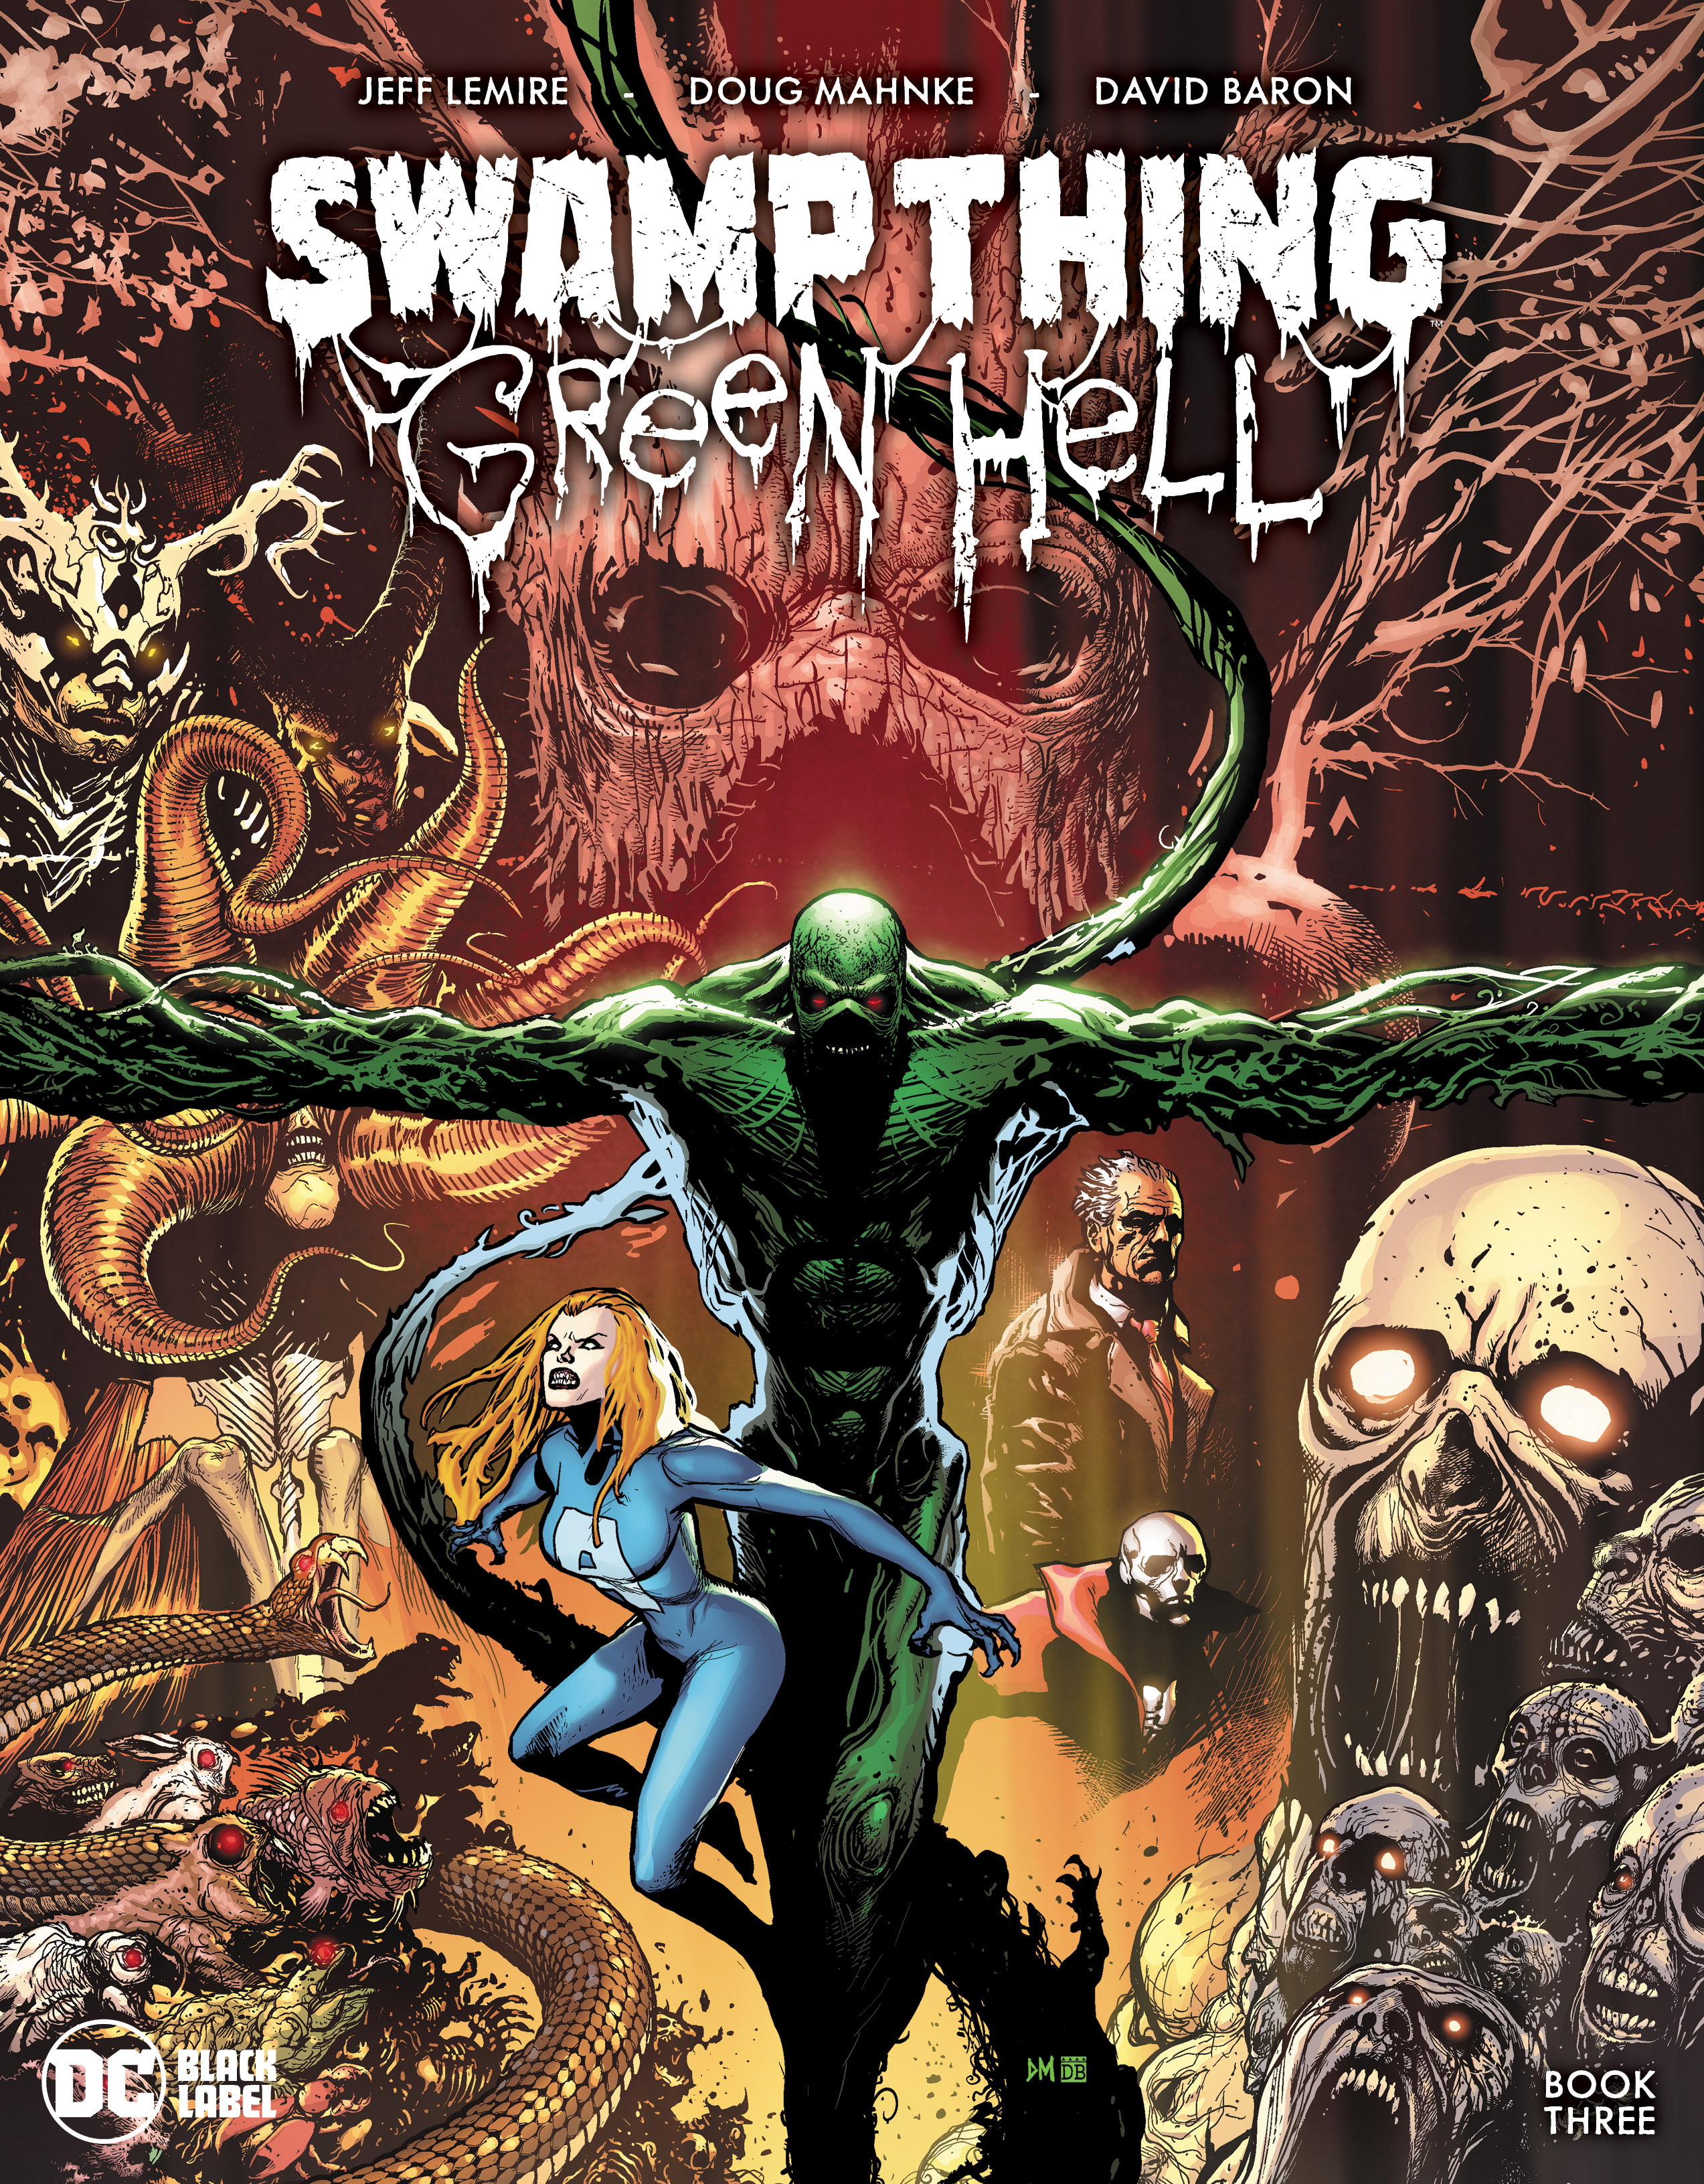 Swamp Thing Green Hell #3 Cover A Doug Mahnke (Mature) (Of 3)